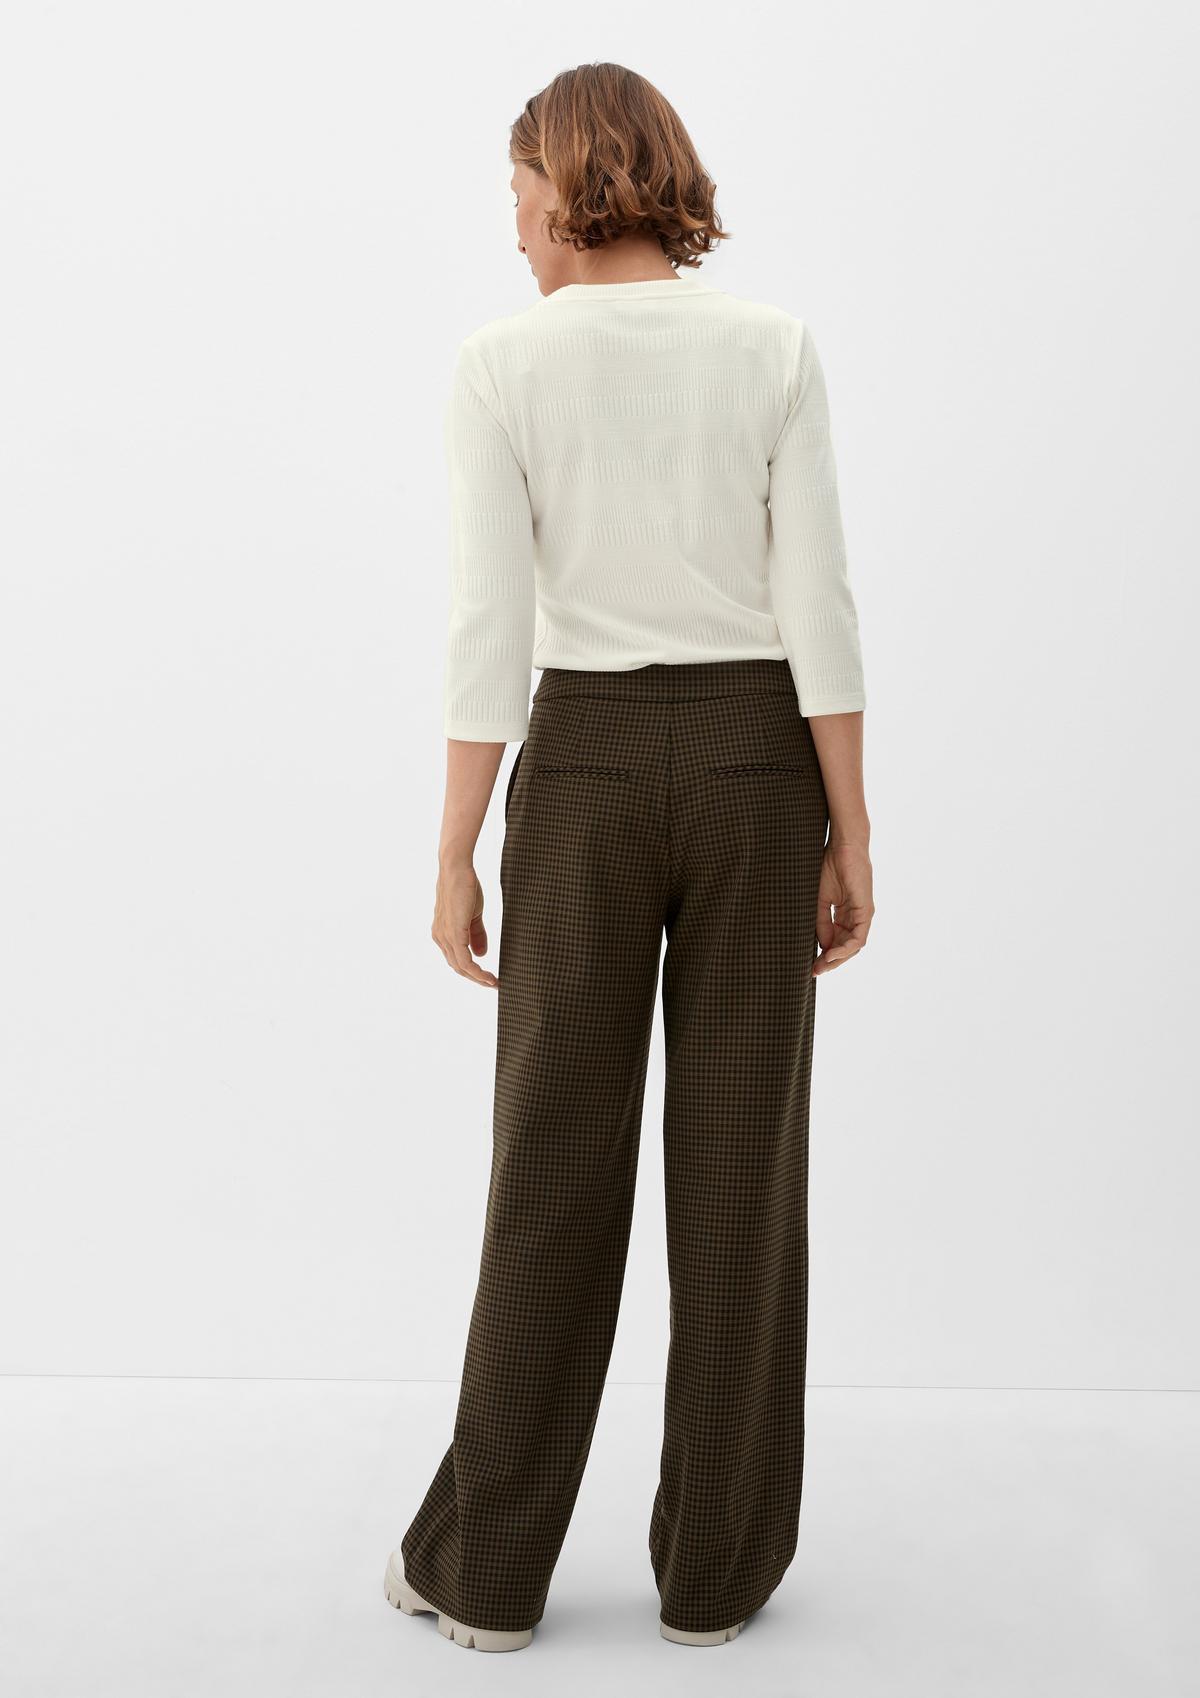 s.Oliver Textured top made of stretch viscose